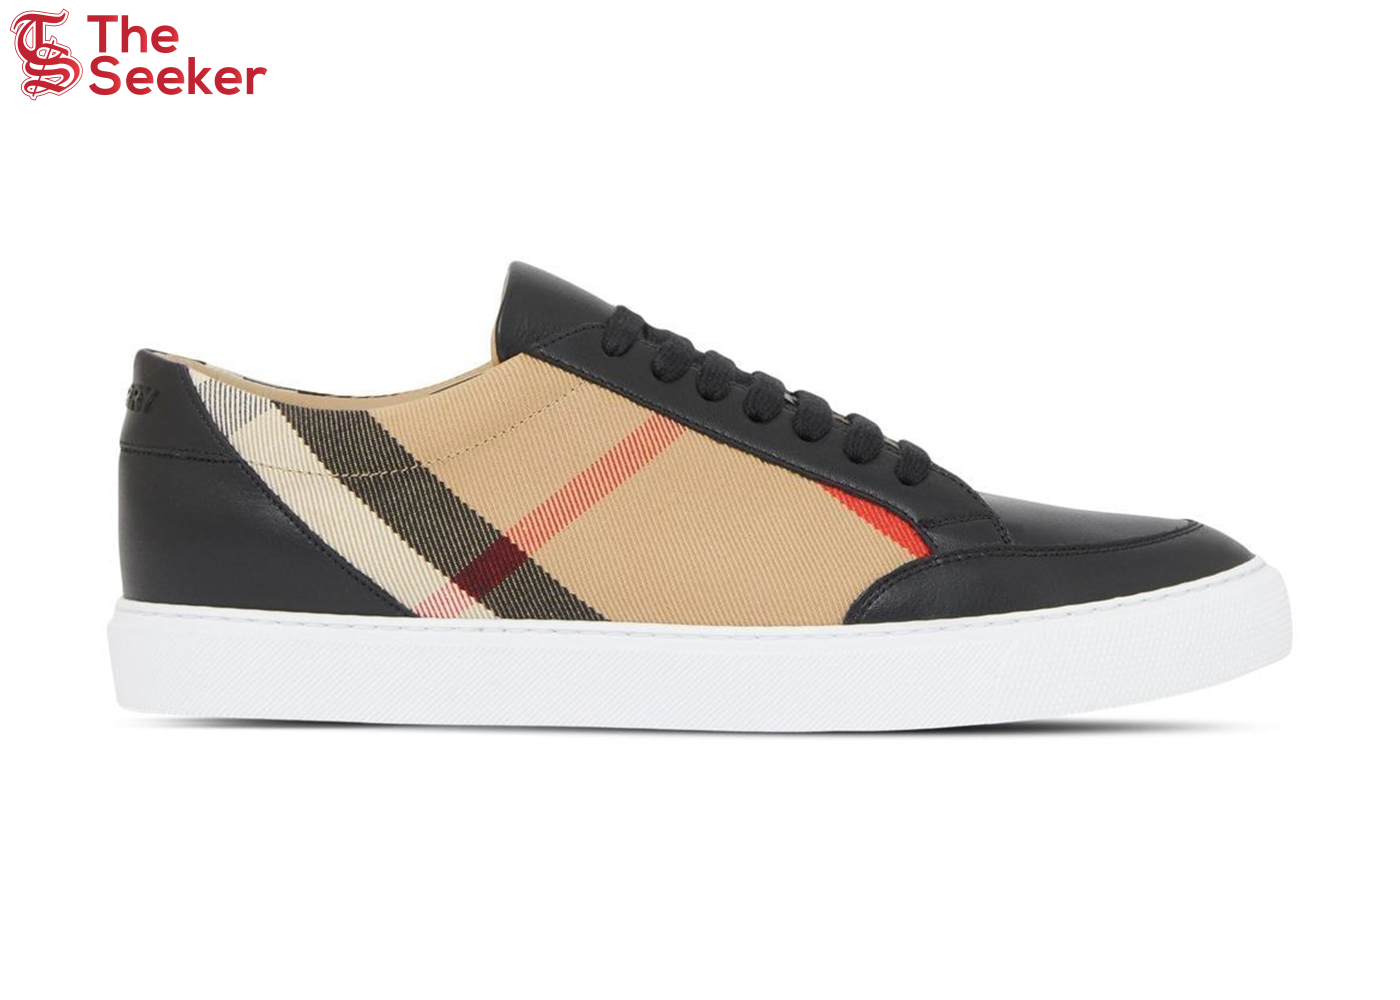 Burberry Leather Suede and House Check Sneakers Black Archive Beige Black White (Women's)